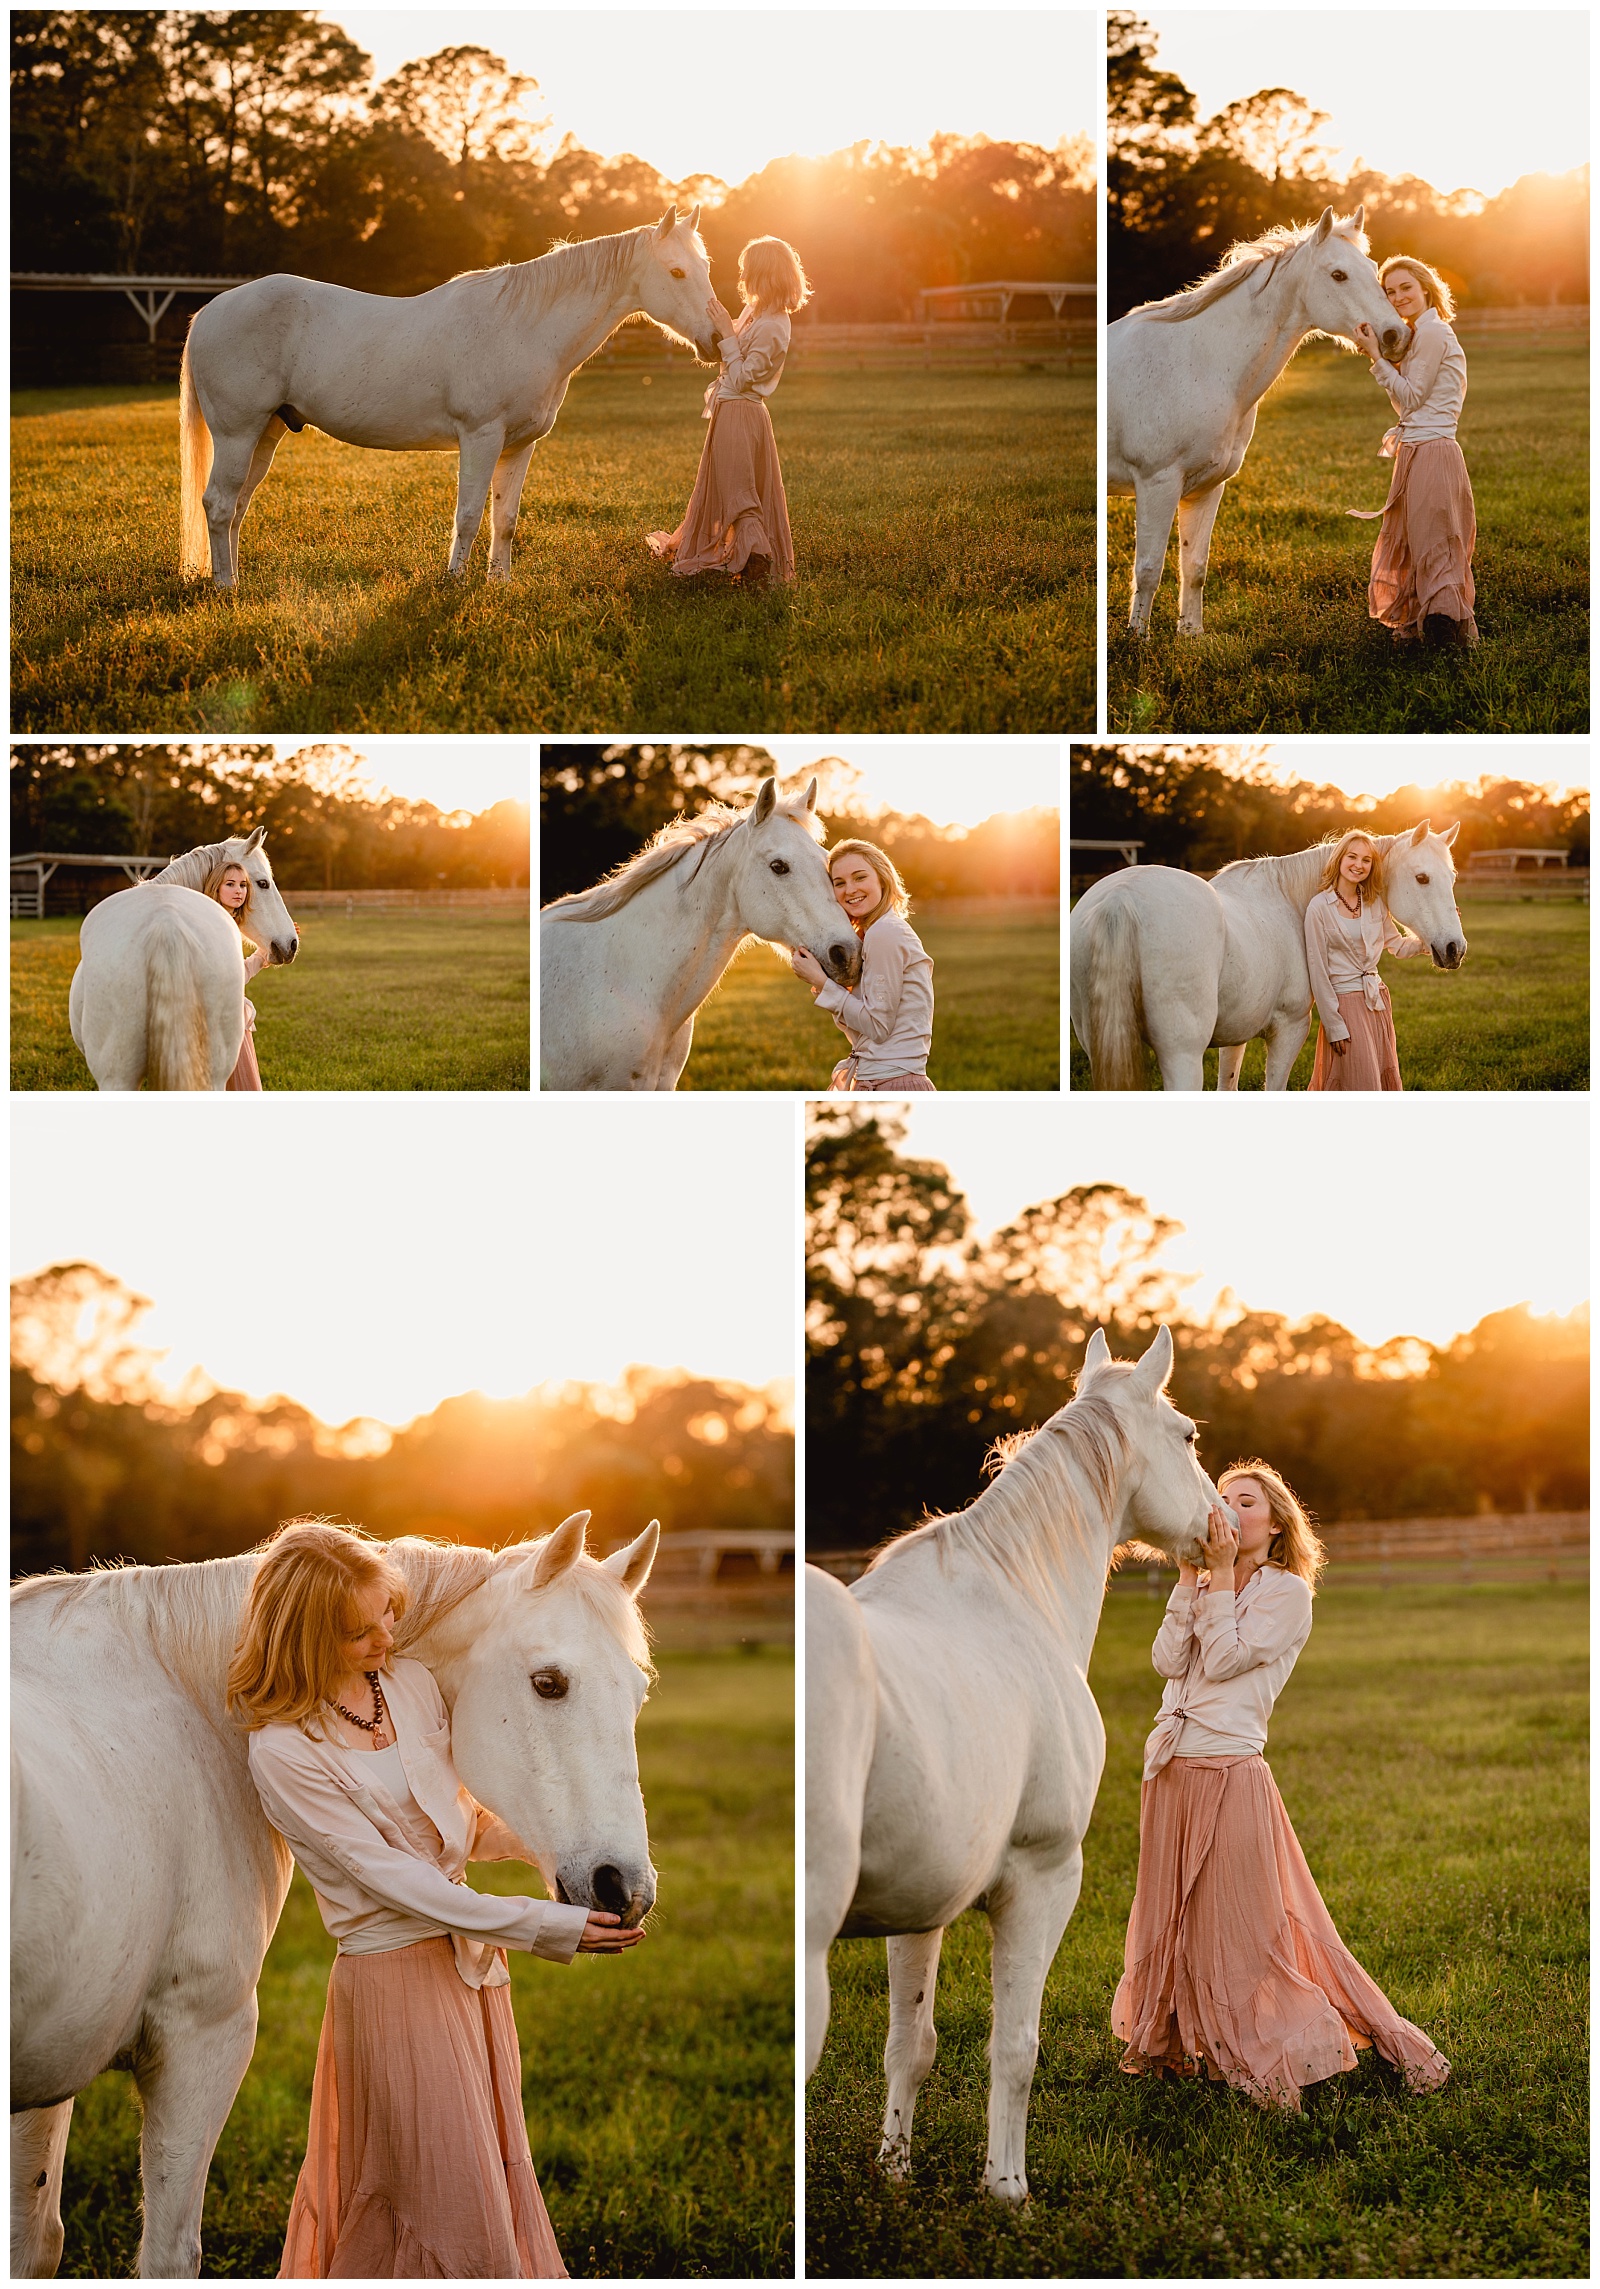 Whimsical horse photography with grey horse and rider in South florida taken by professional equestrian photographer.